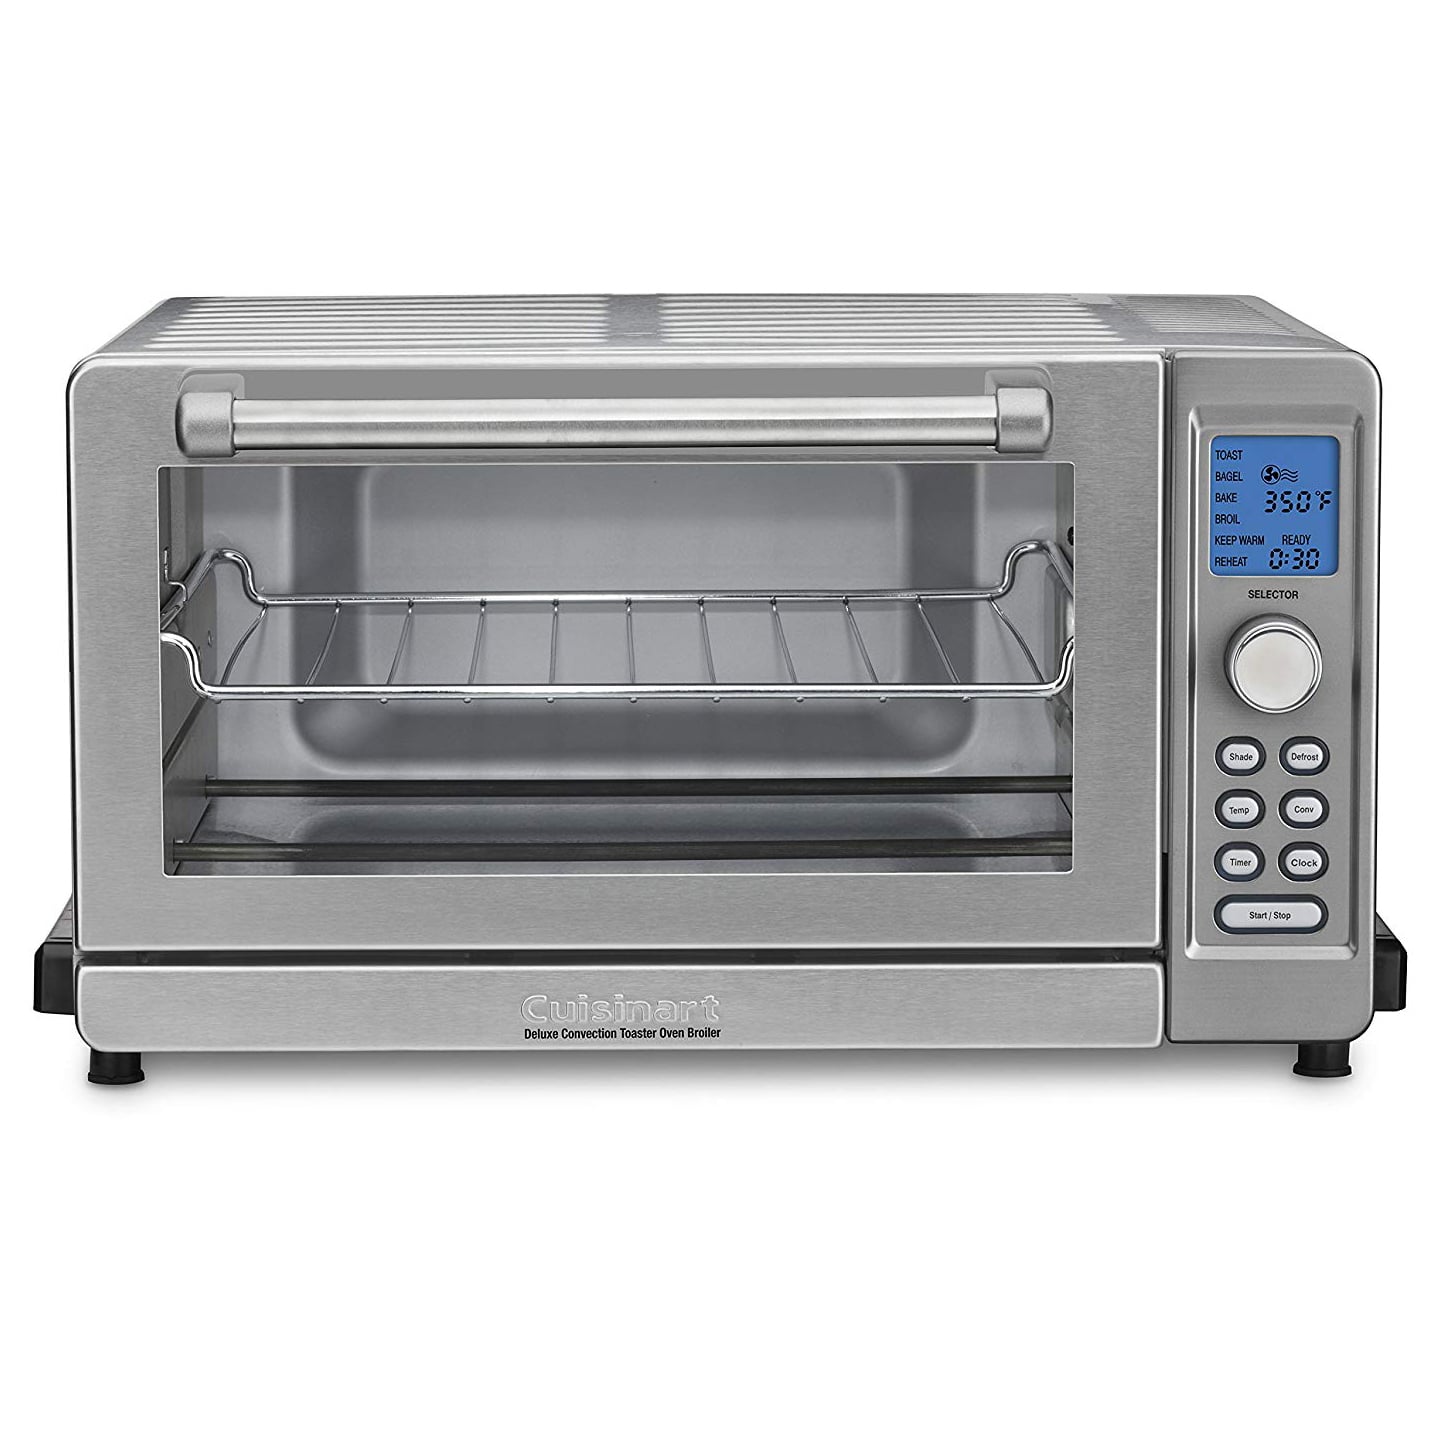 Top 10 Best Infrared Convection Ovens In 2020 Reviews Buyer S Guide